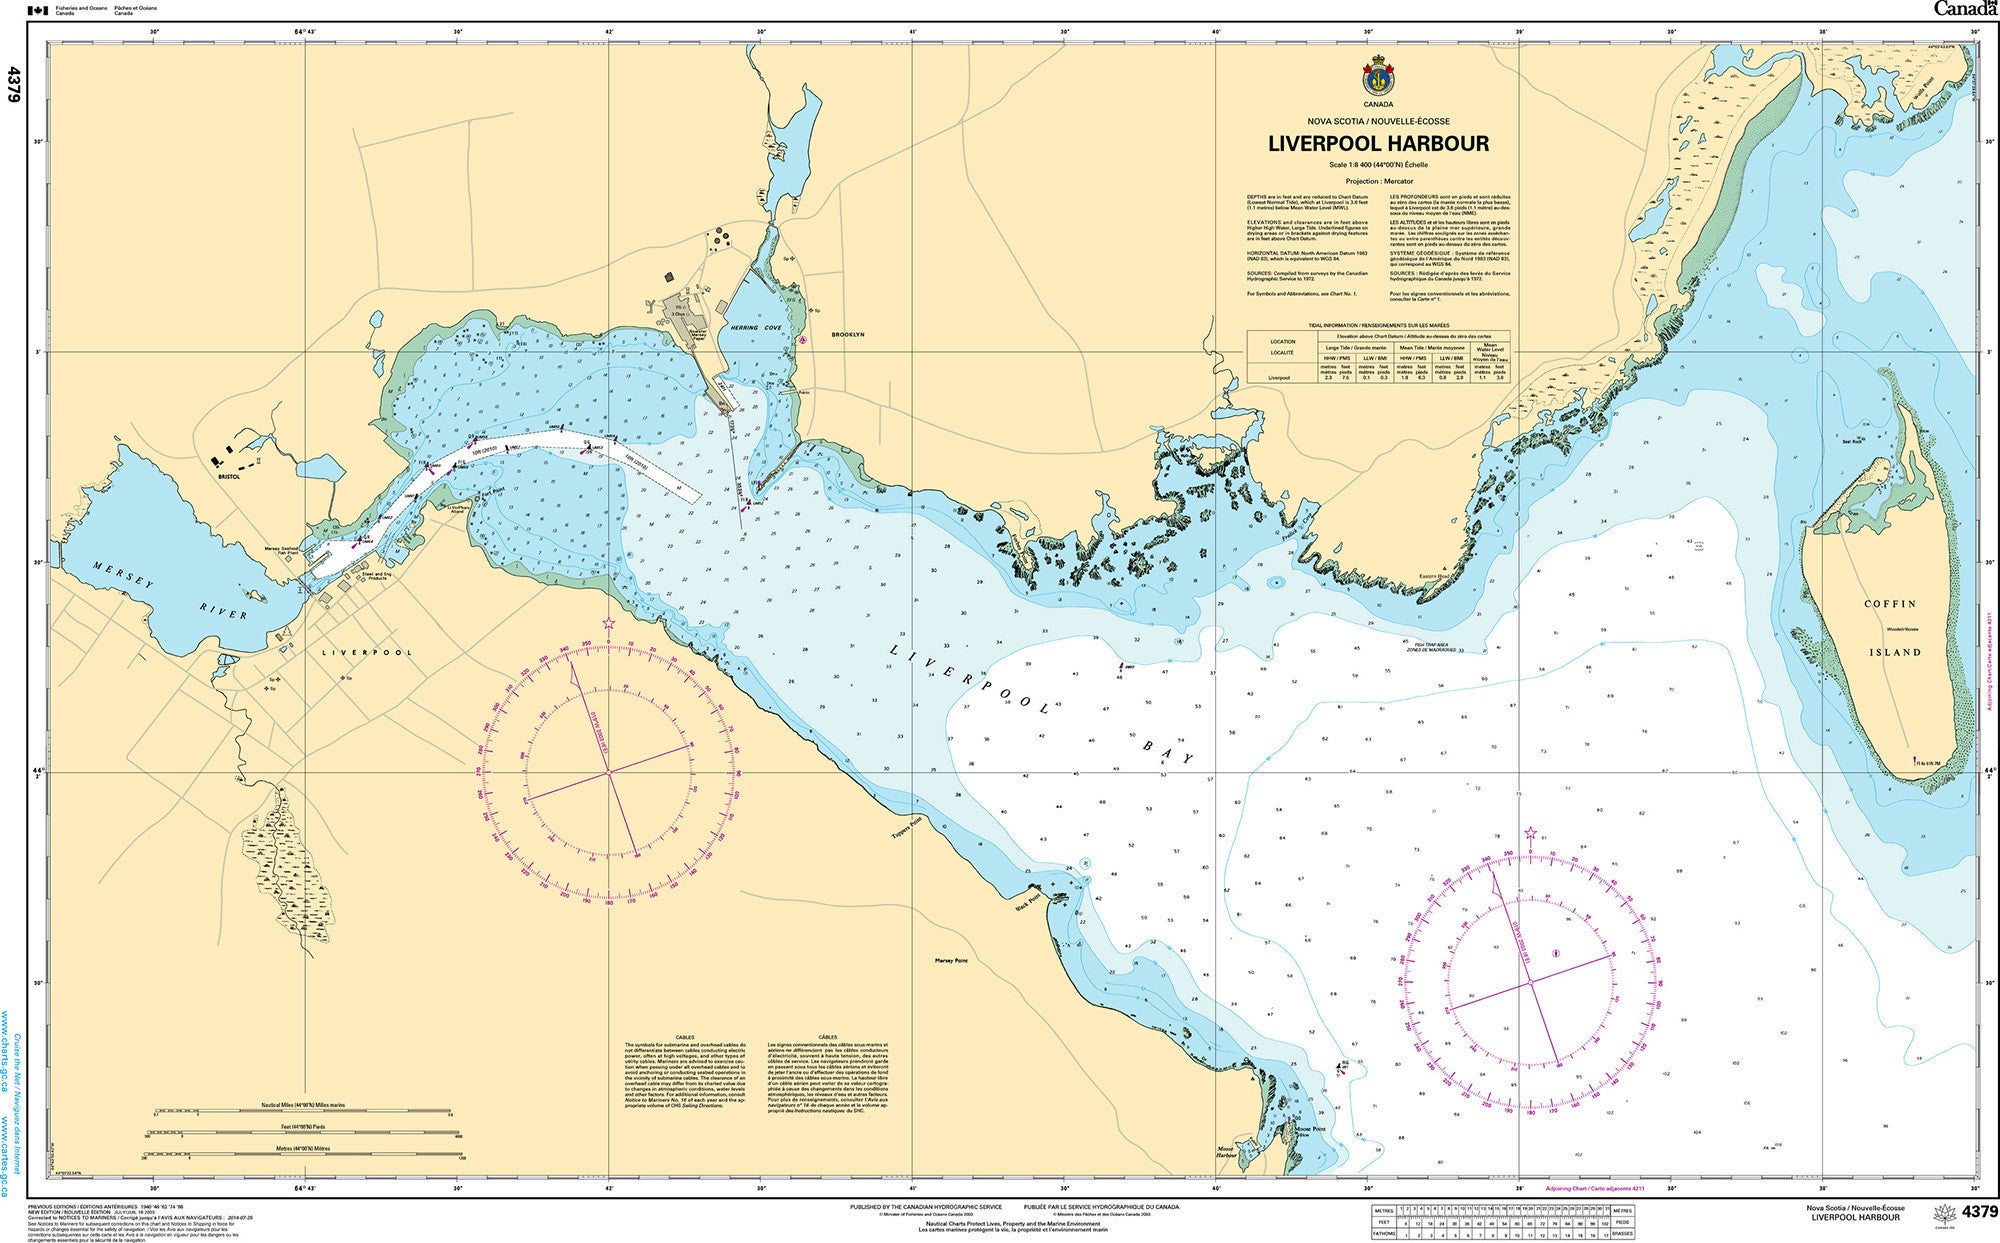 Canadian Hydrographic Service Nautical Chart CHS4379: Liverpool Harbour